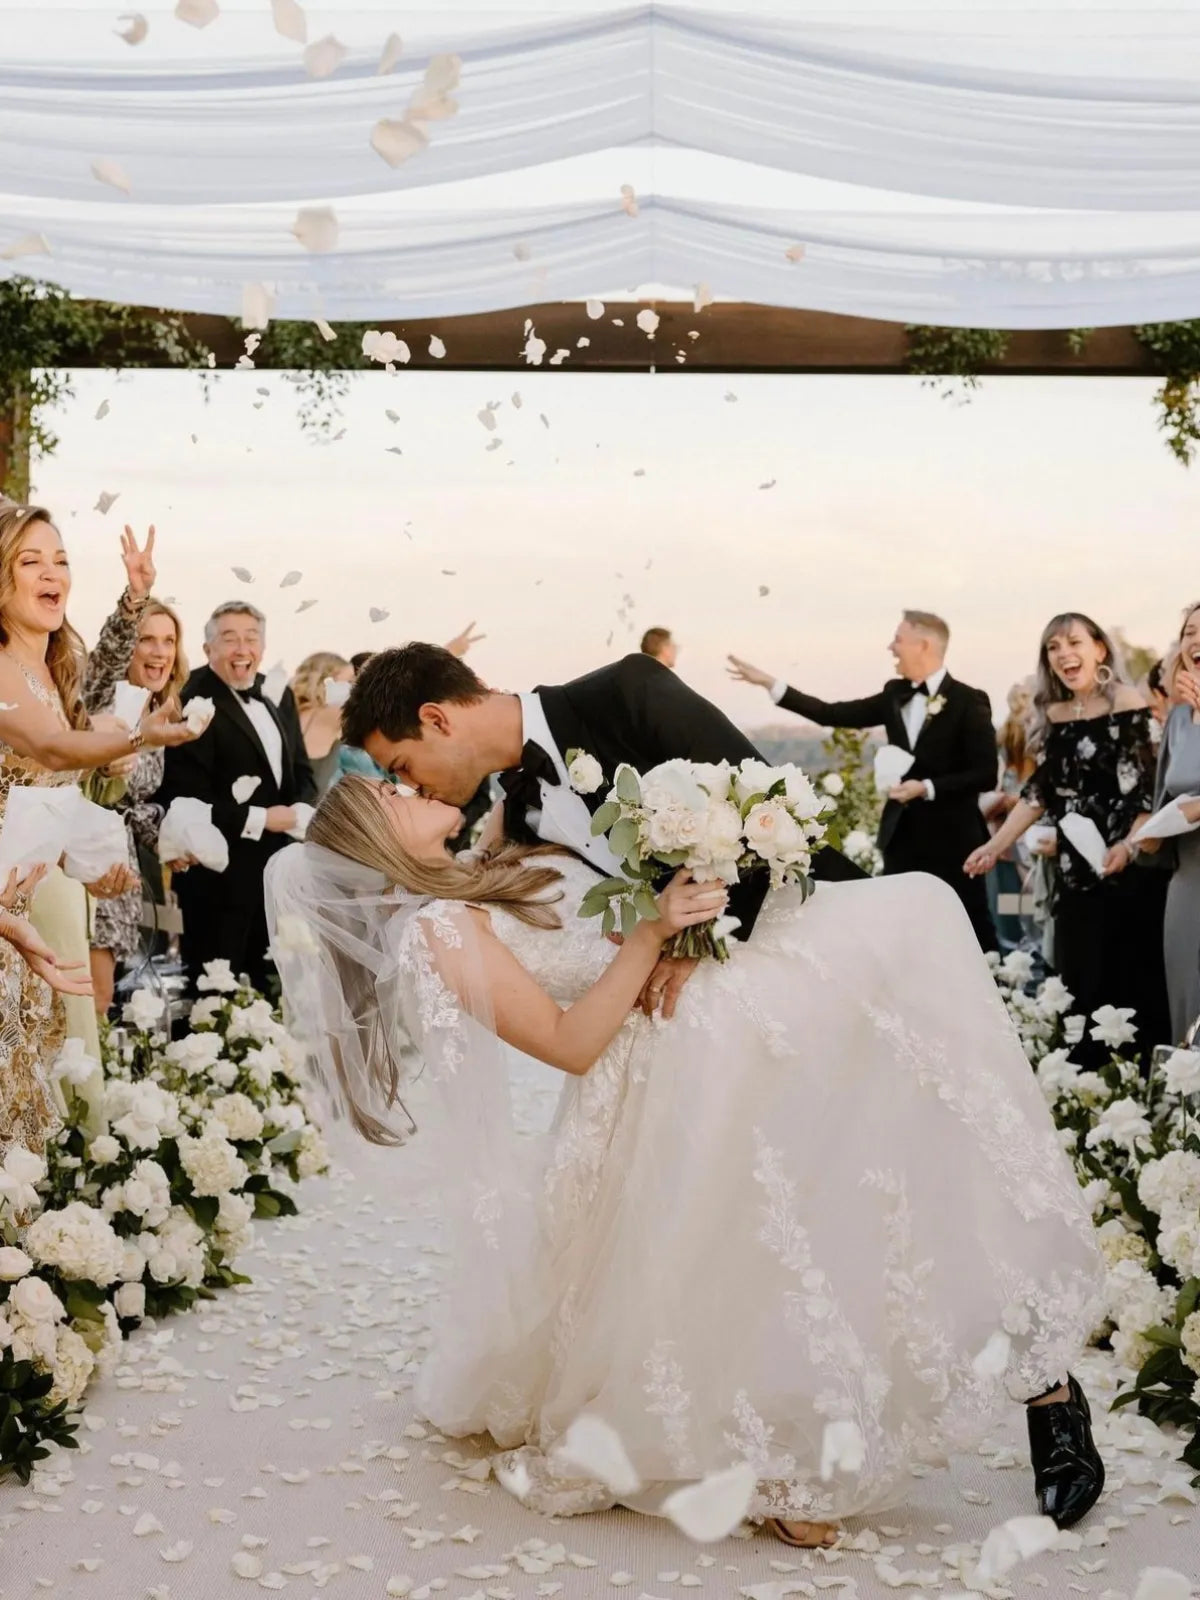 The fabulous wedding of Taylor Lautner and Taylor Dome